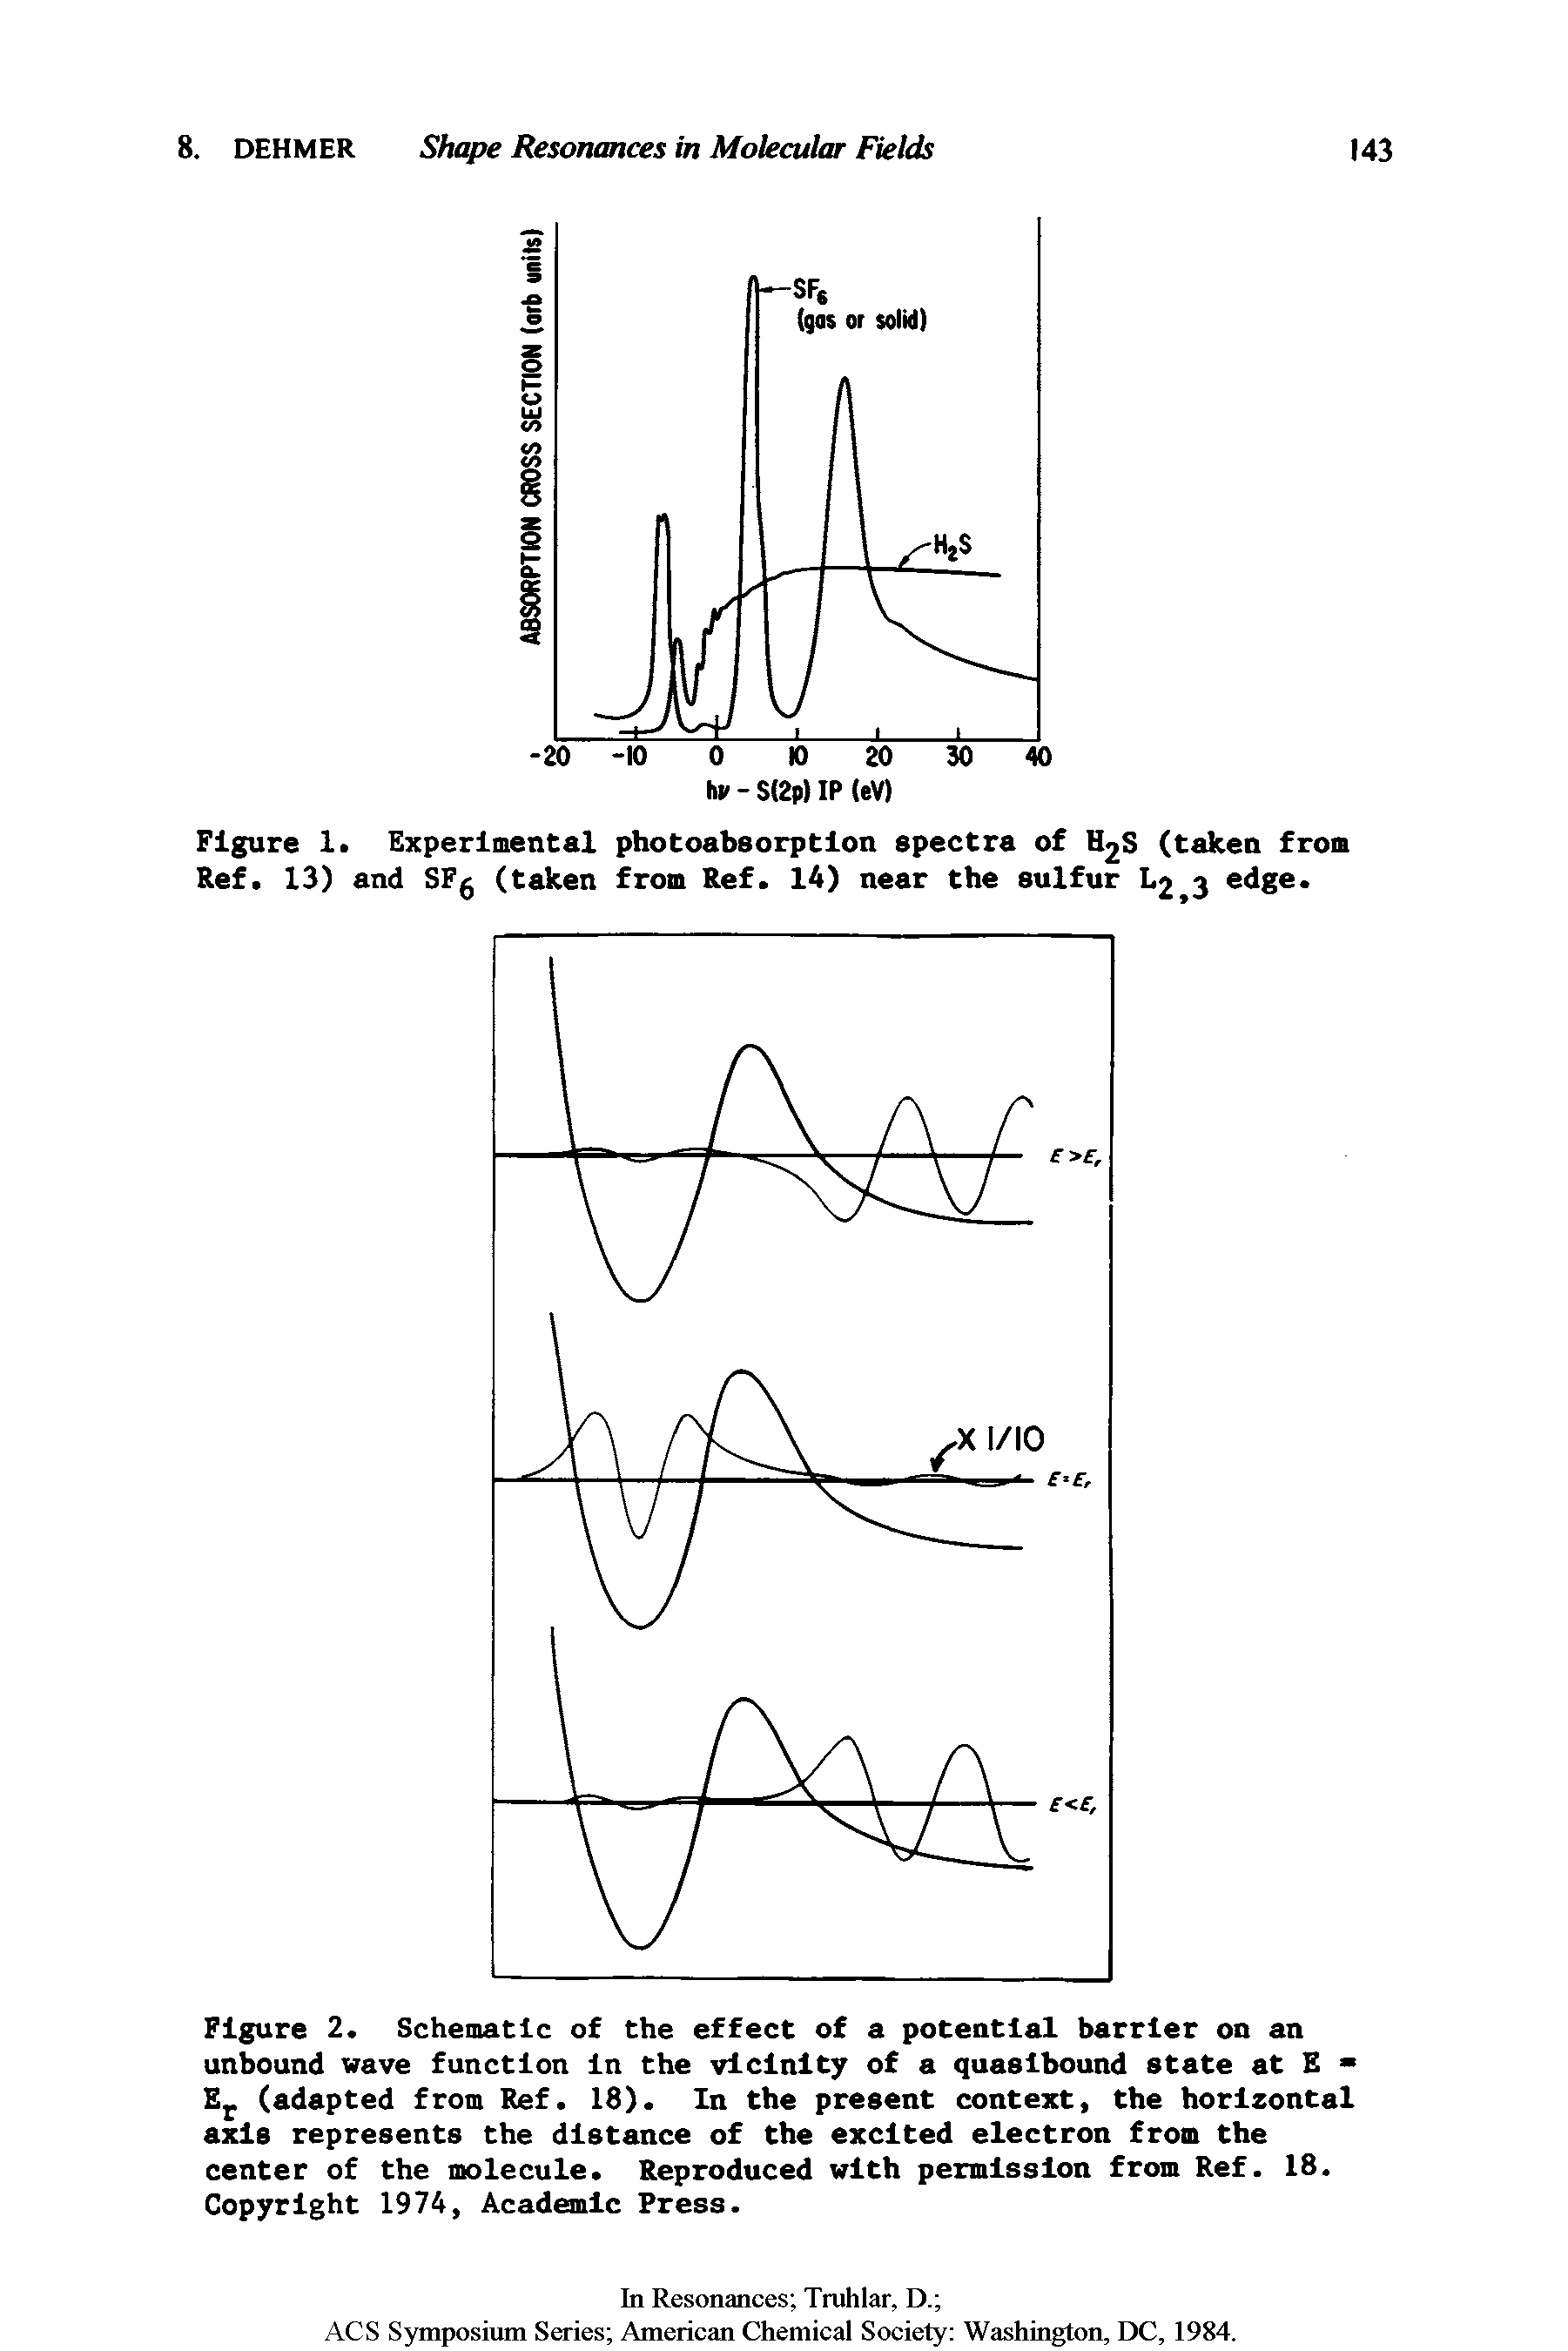 Figure 2. Schematic of the effect of a potential barrier on an unbound wave function In the vicinity of a quasibound state at E E (adapted from Ref. 18). In the present context, the horizontal axis represents the distance of the excited electron from the center of the molecule. Reproduced with permission from Ref. 18. Copyright 1974, Academic Press.